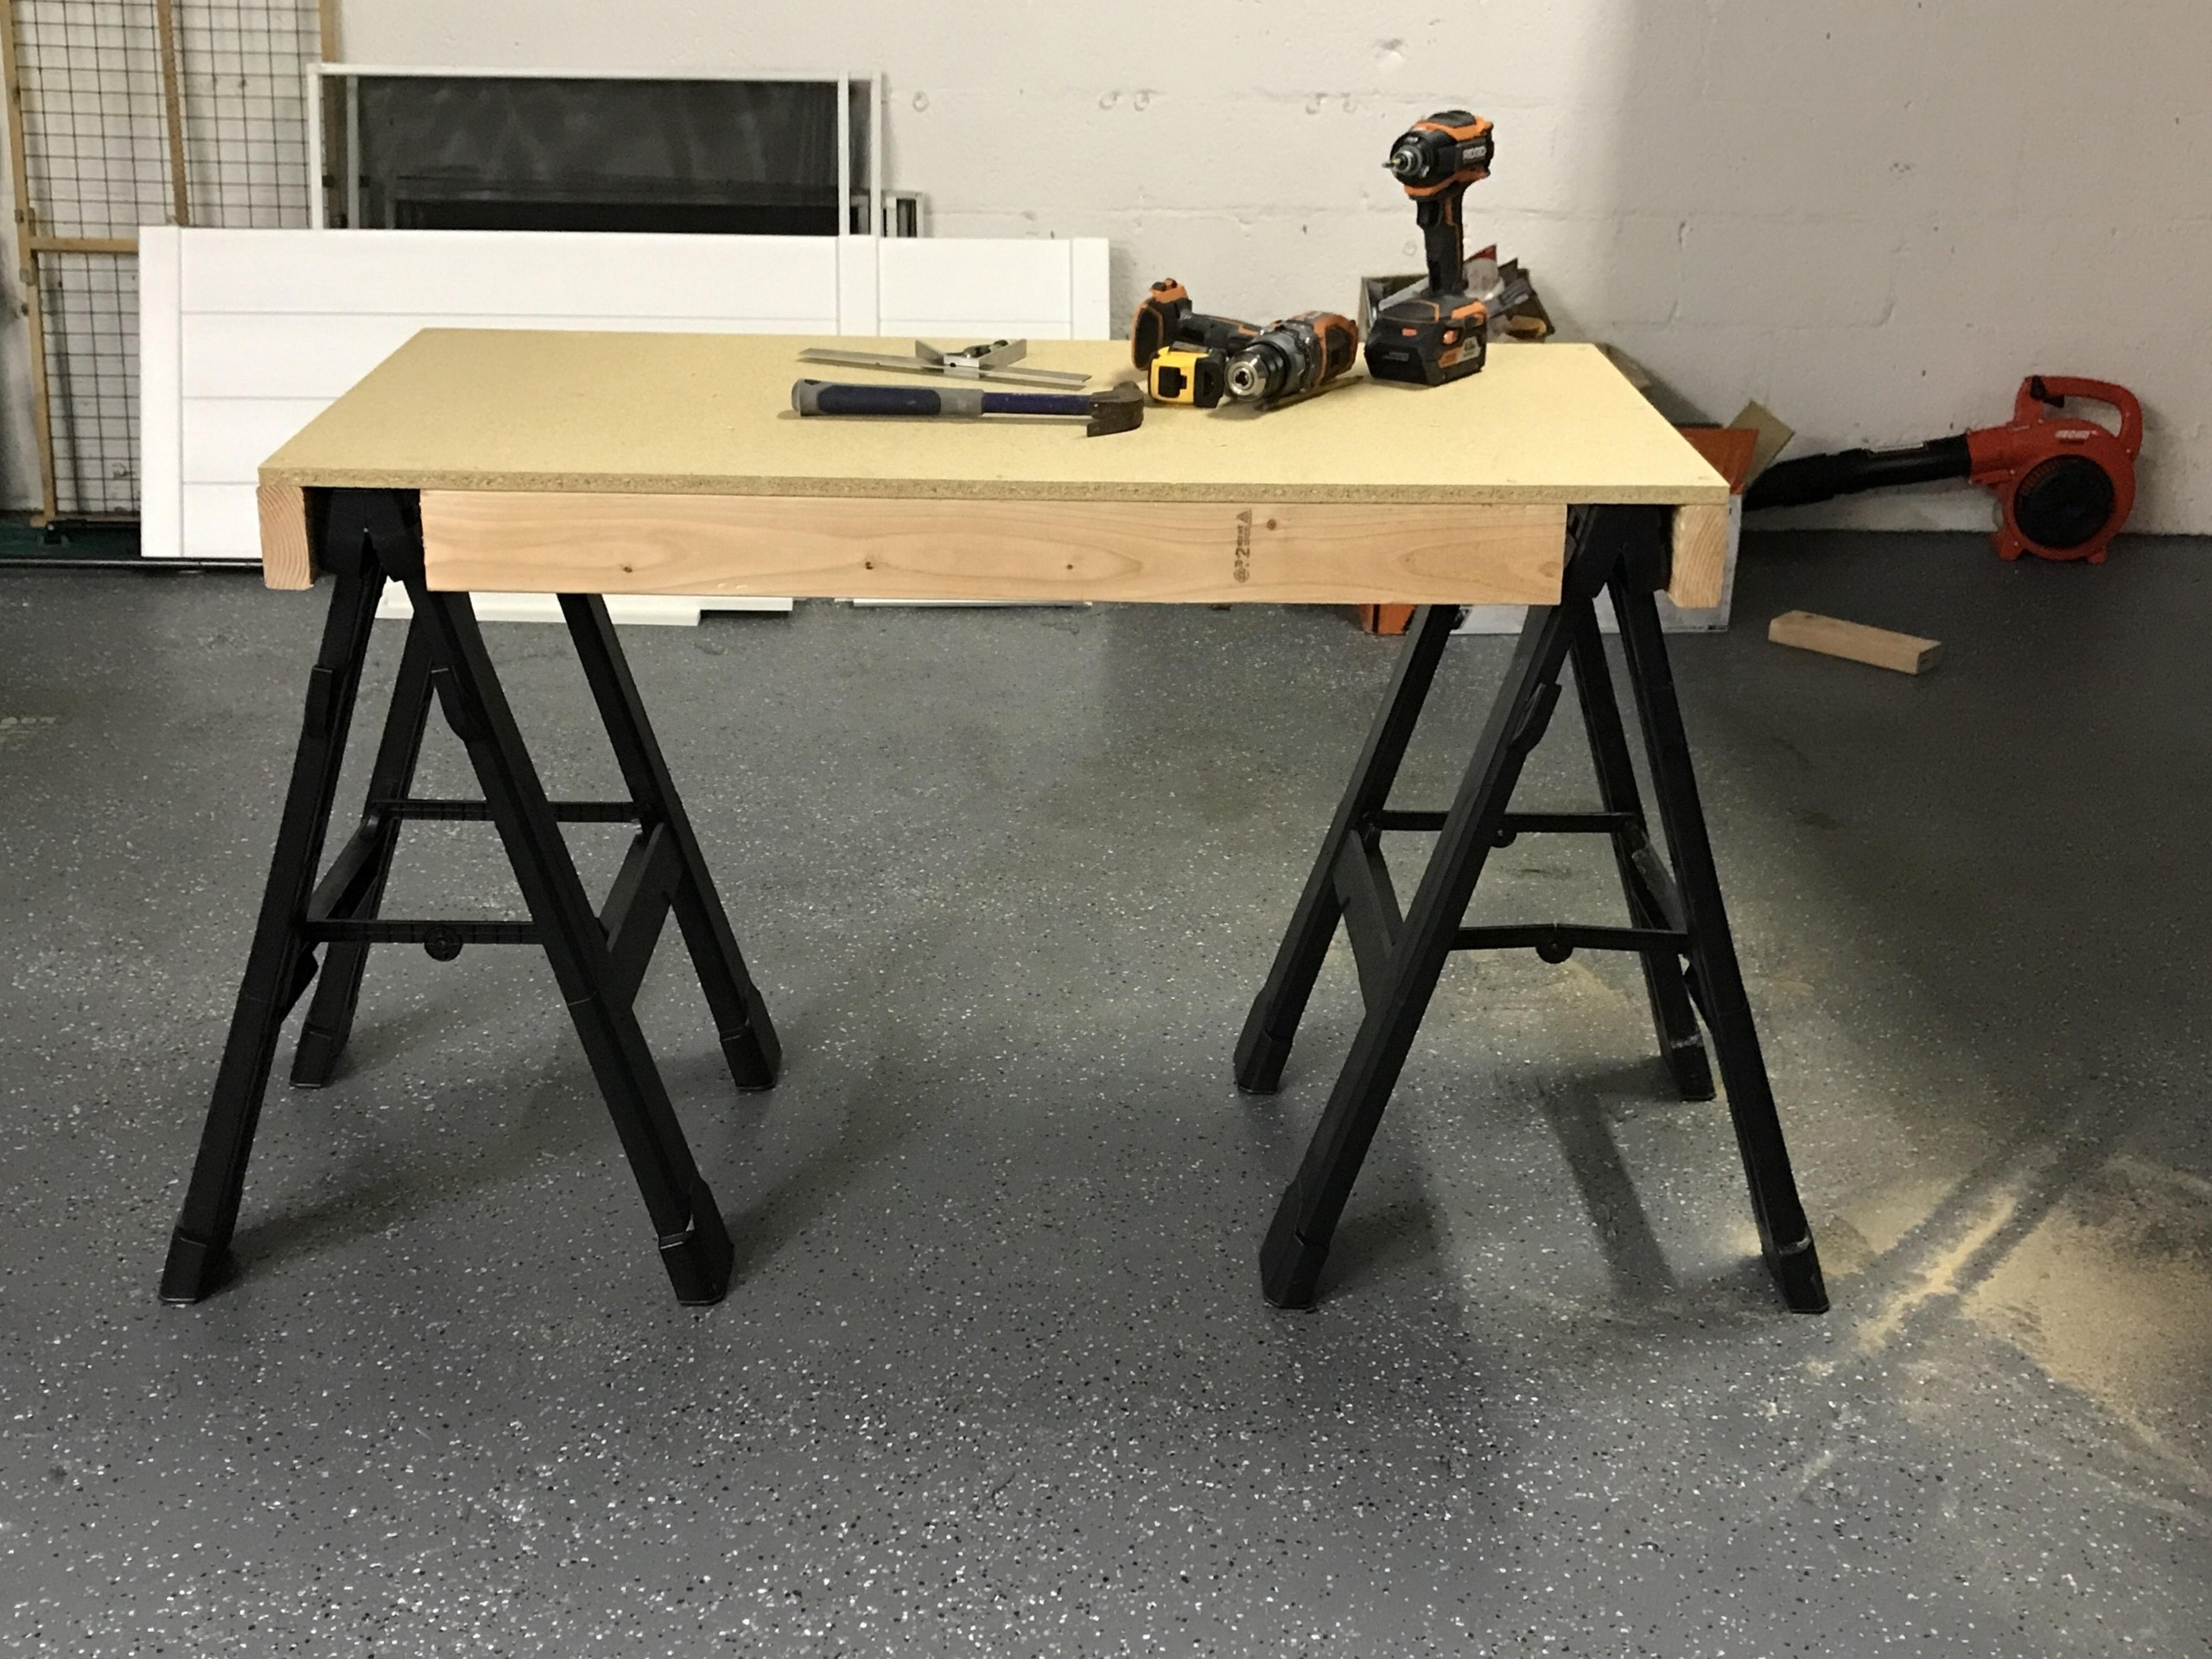 I too built my first semi portable work bench woodworking